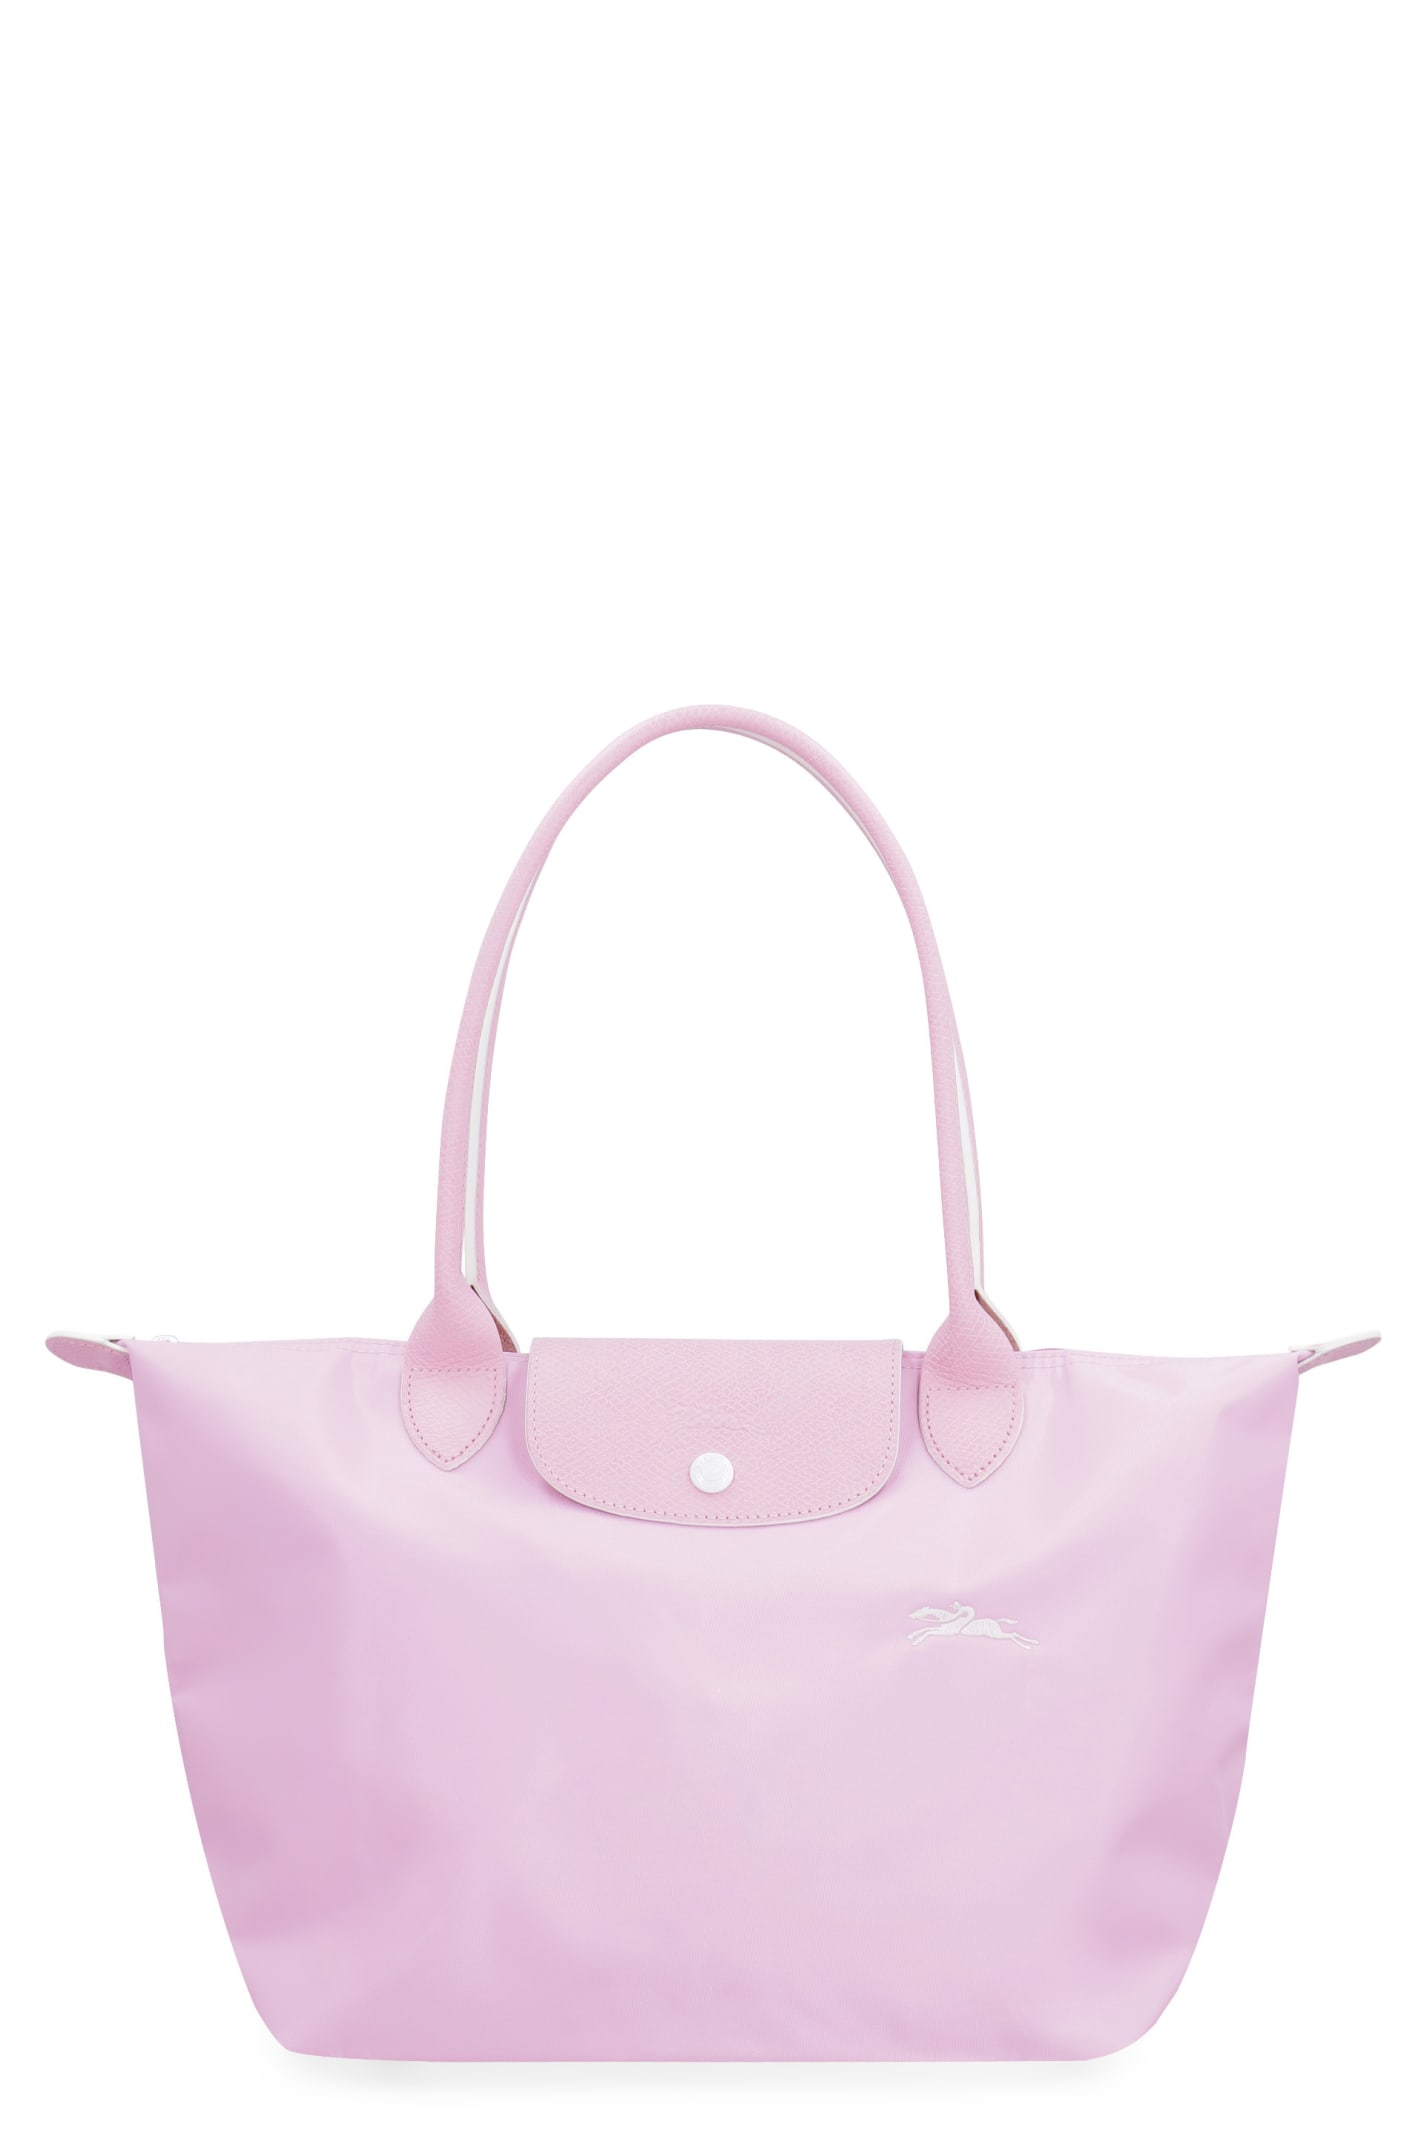 Longchamp Le Pliage Club Small Shoulder Tote In Pink/silver